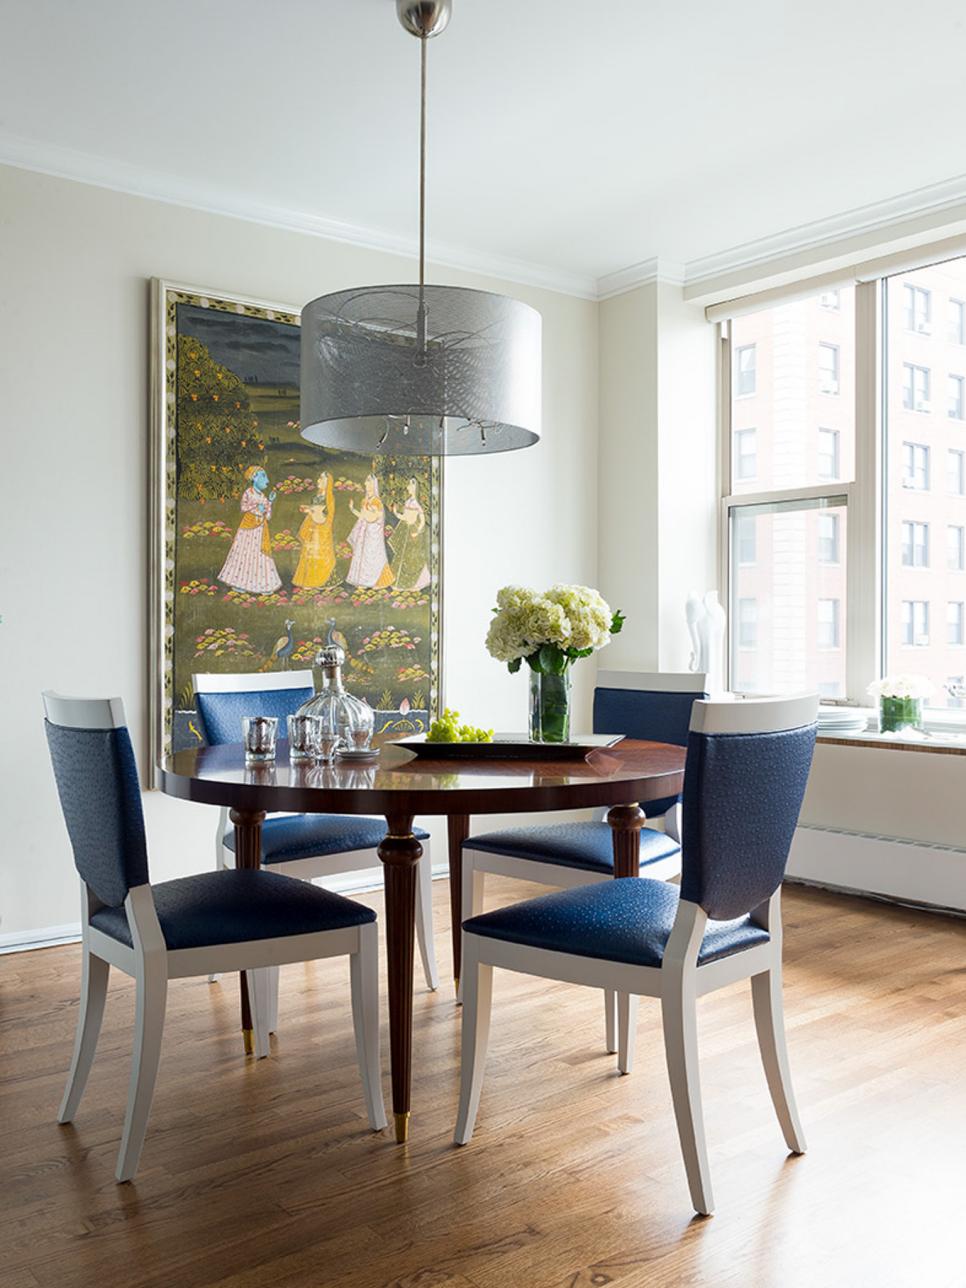 Eclectic Dining Room With Indian-Inspired Art and Metallic Chandelier